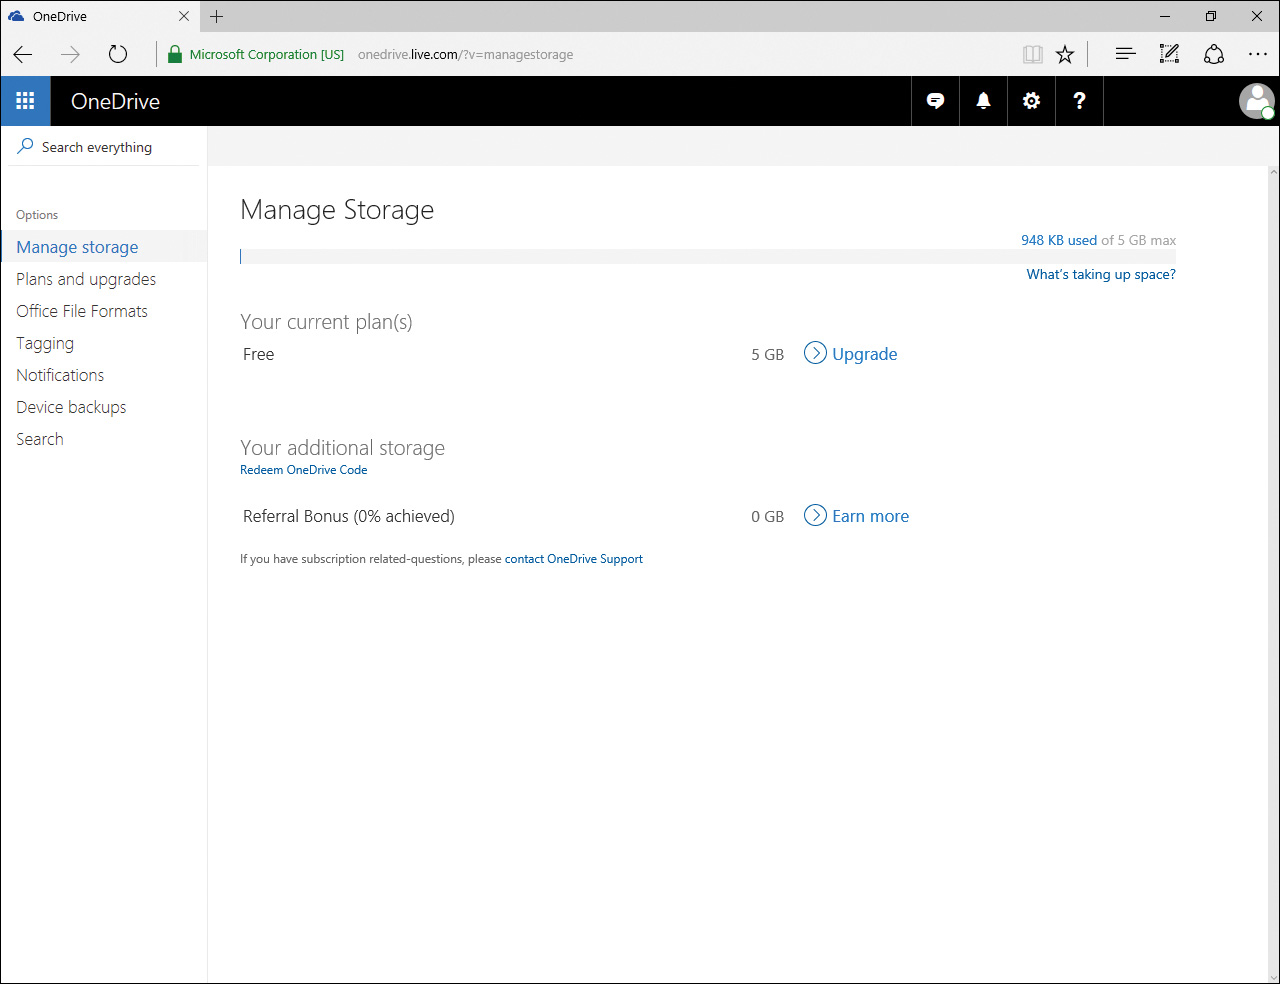 Screenshot shows OneDrive Settings available on a Web Interface.